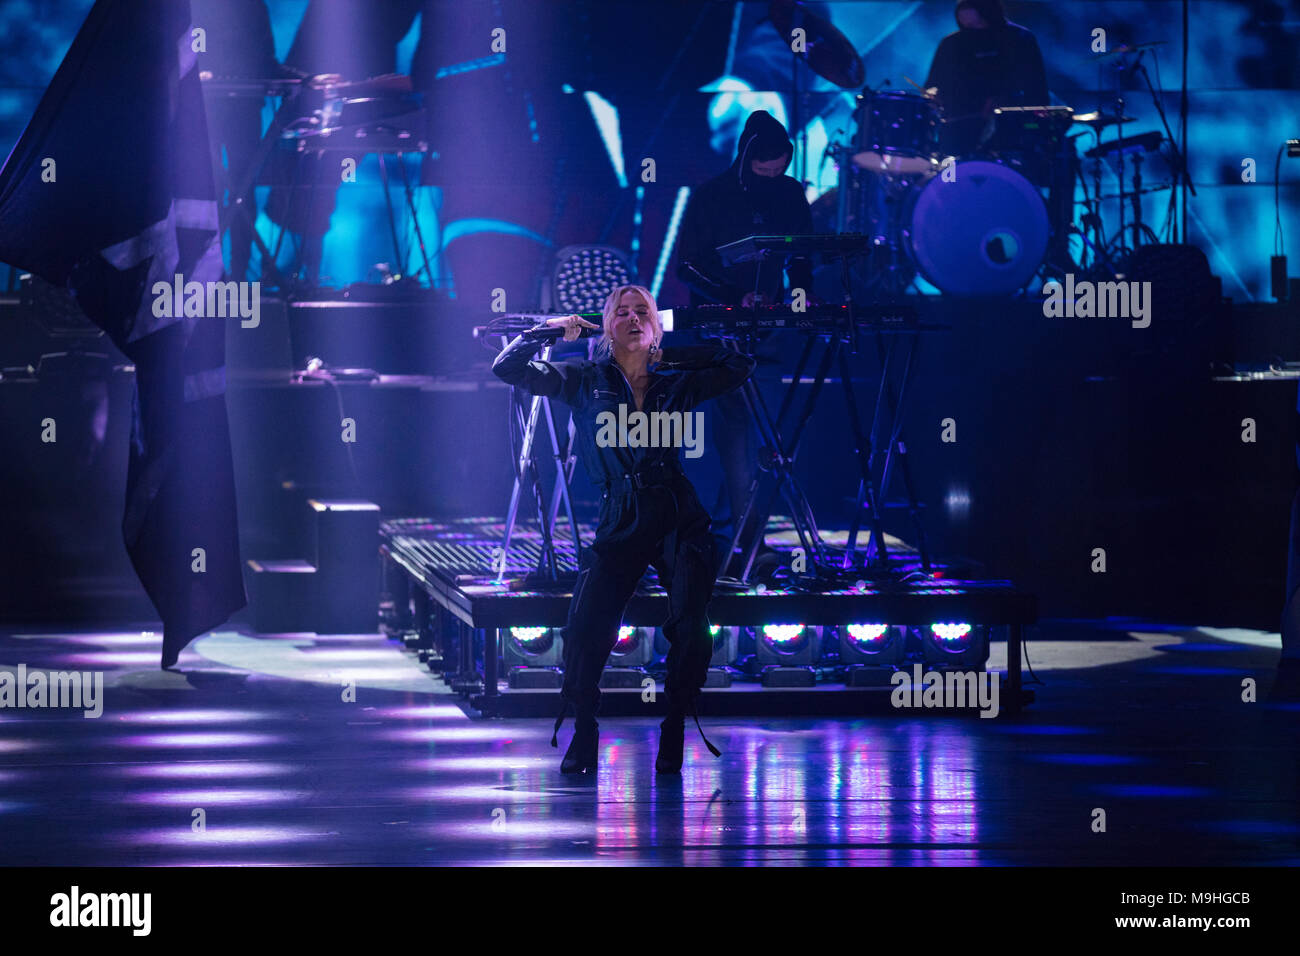 Norway, Oslo - February 25, 2018. The Norwegian DJ and record producer Alan Walker performs a live concert at Oslo Konserthus during the Norwegian Grammy Awards, Spellemannprisen 2017, in Oslo. Here the Norwegian singer Julie Bergan makes a guest appearance. (Photo credit: Gonzales Photo - Stian S. Moller). Stock Photo